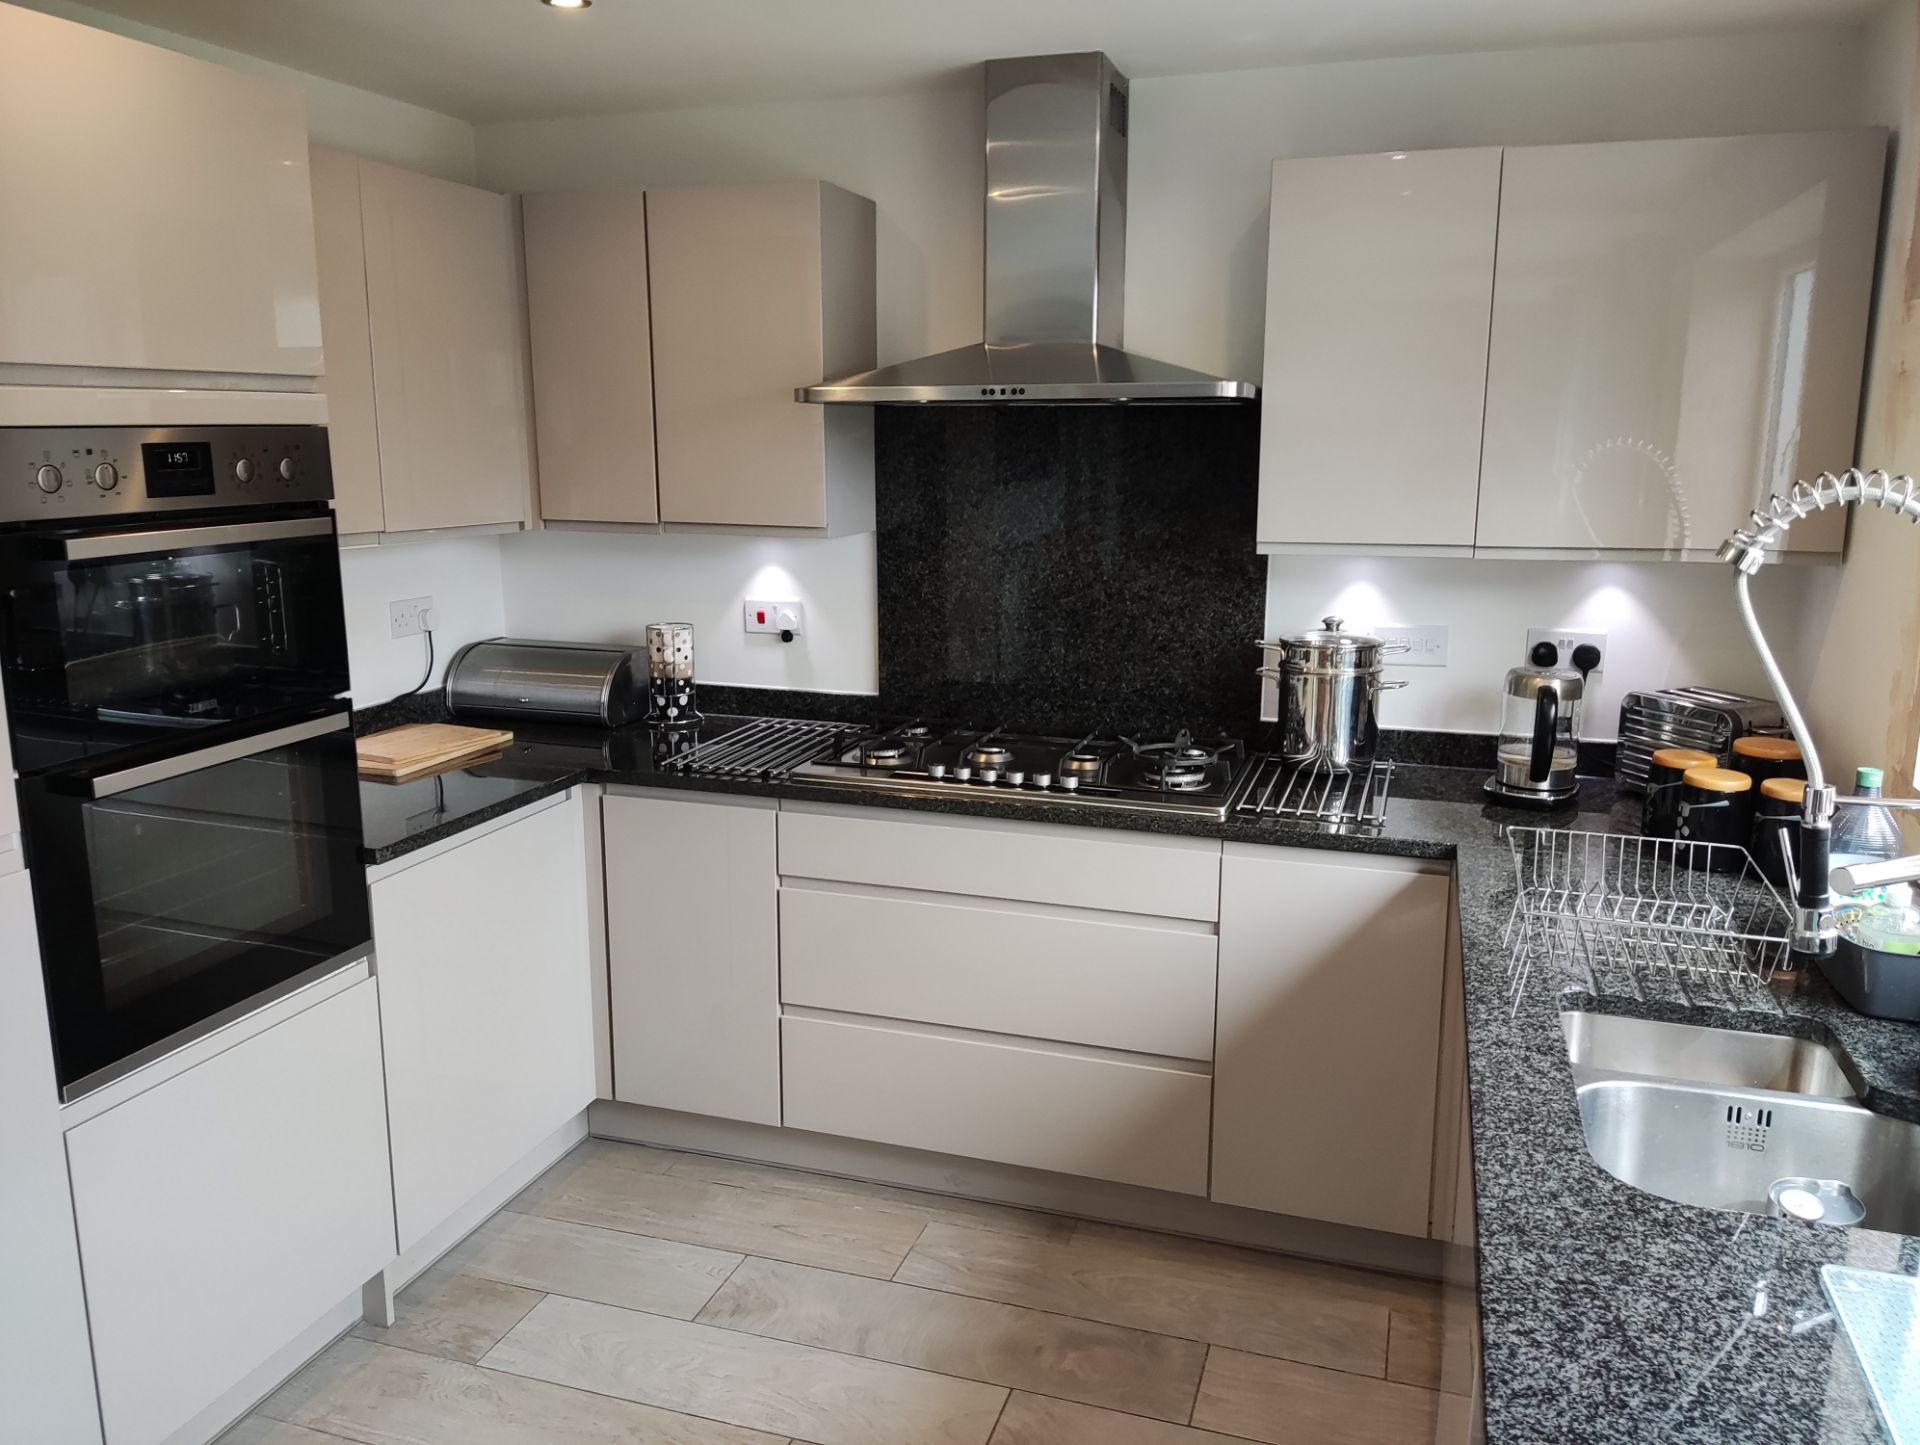 1 x Modern Handleless Kitchen Featuring Granite Worktops, A Double Oven, And Under-lighting - NO VAT - Image 34 of 56